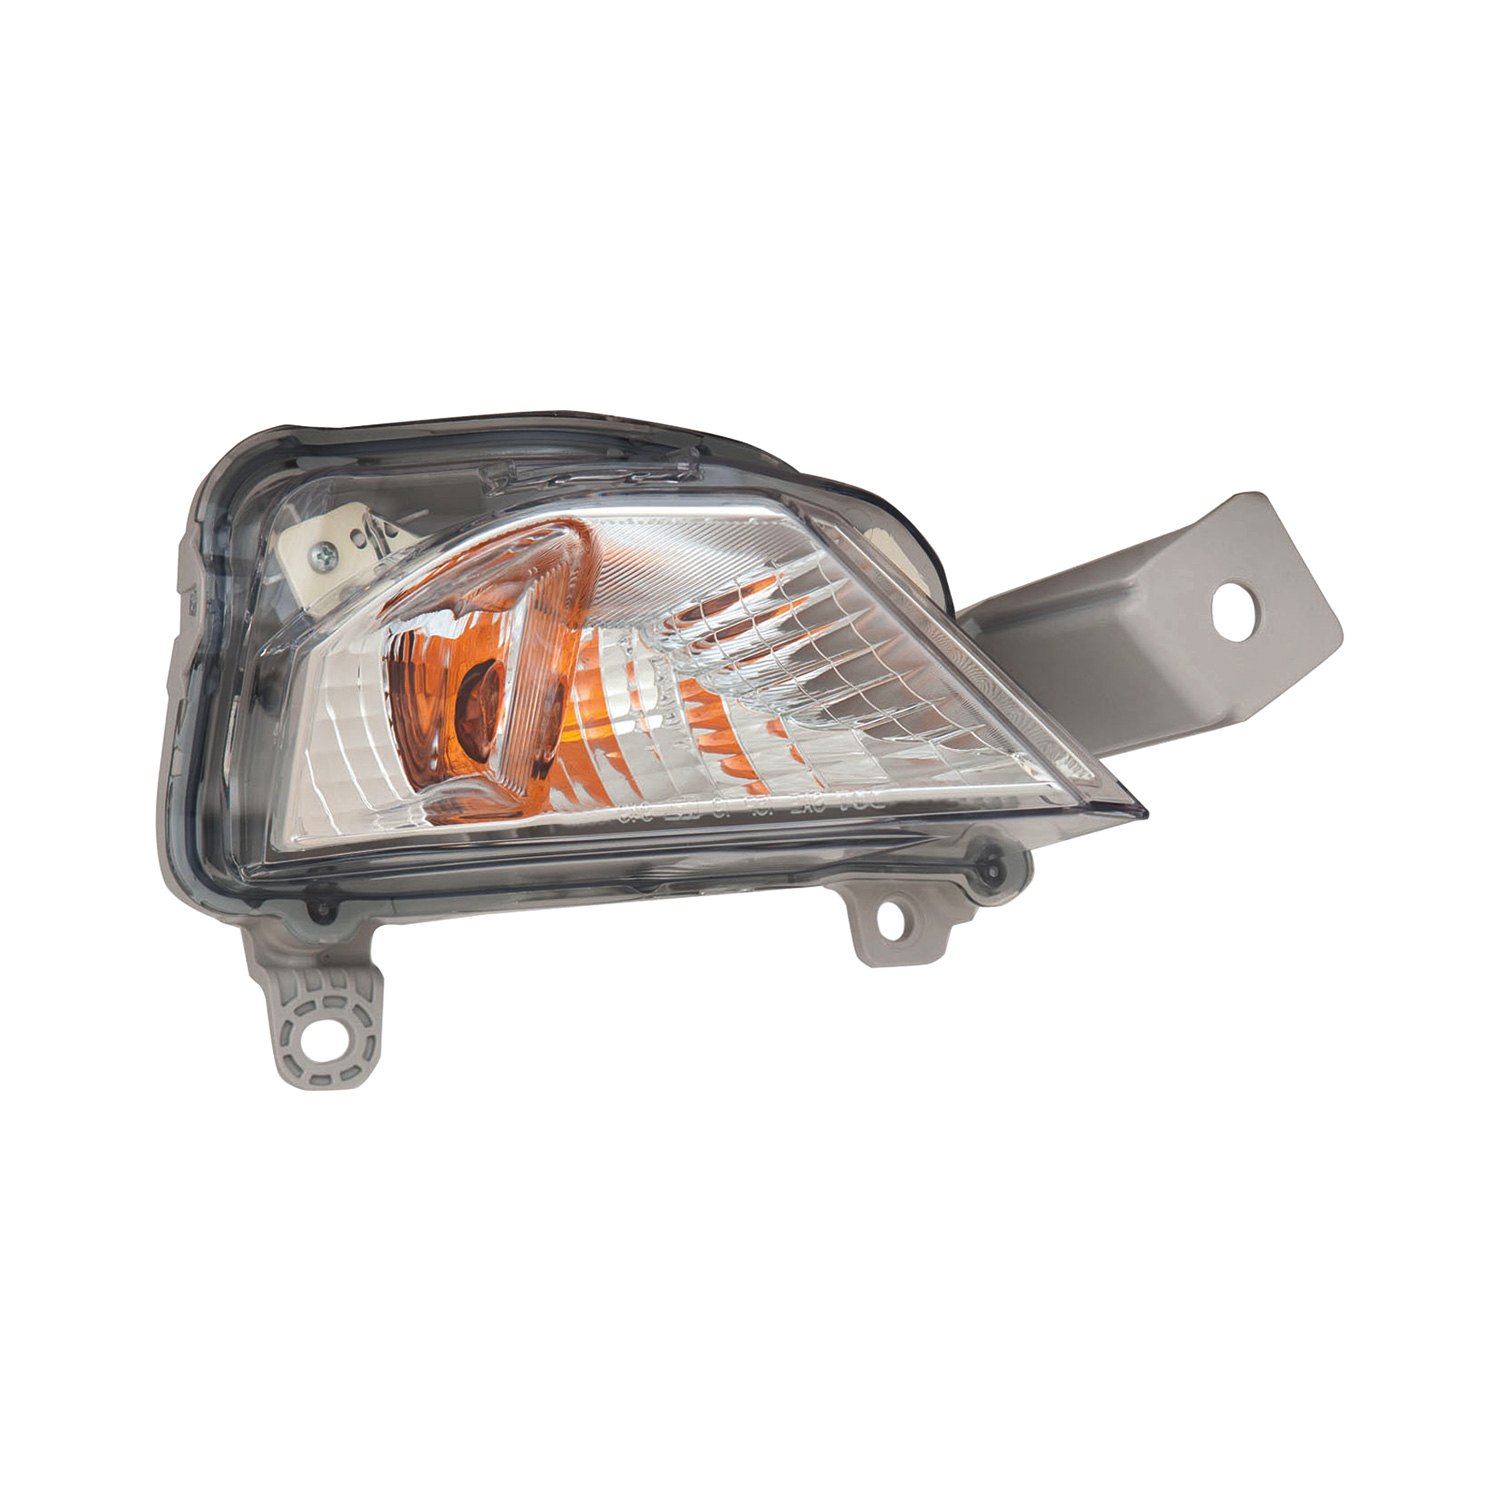 Partslink Number CH2521133 OE Replacement Chrysler Concorde Passenger Side Parklight Assembly 